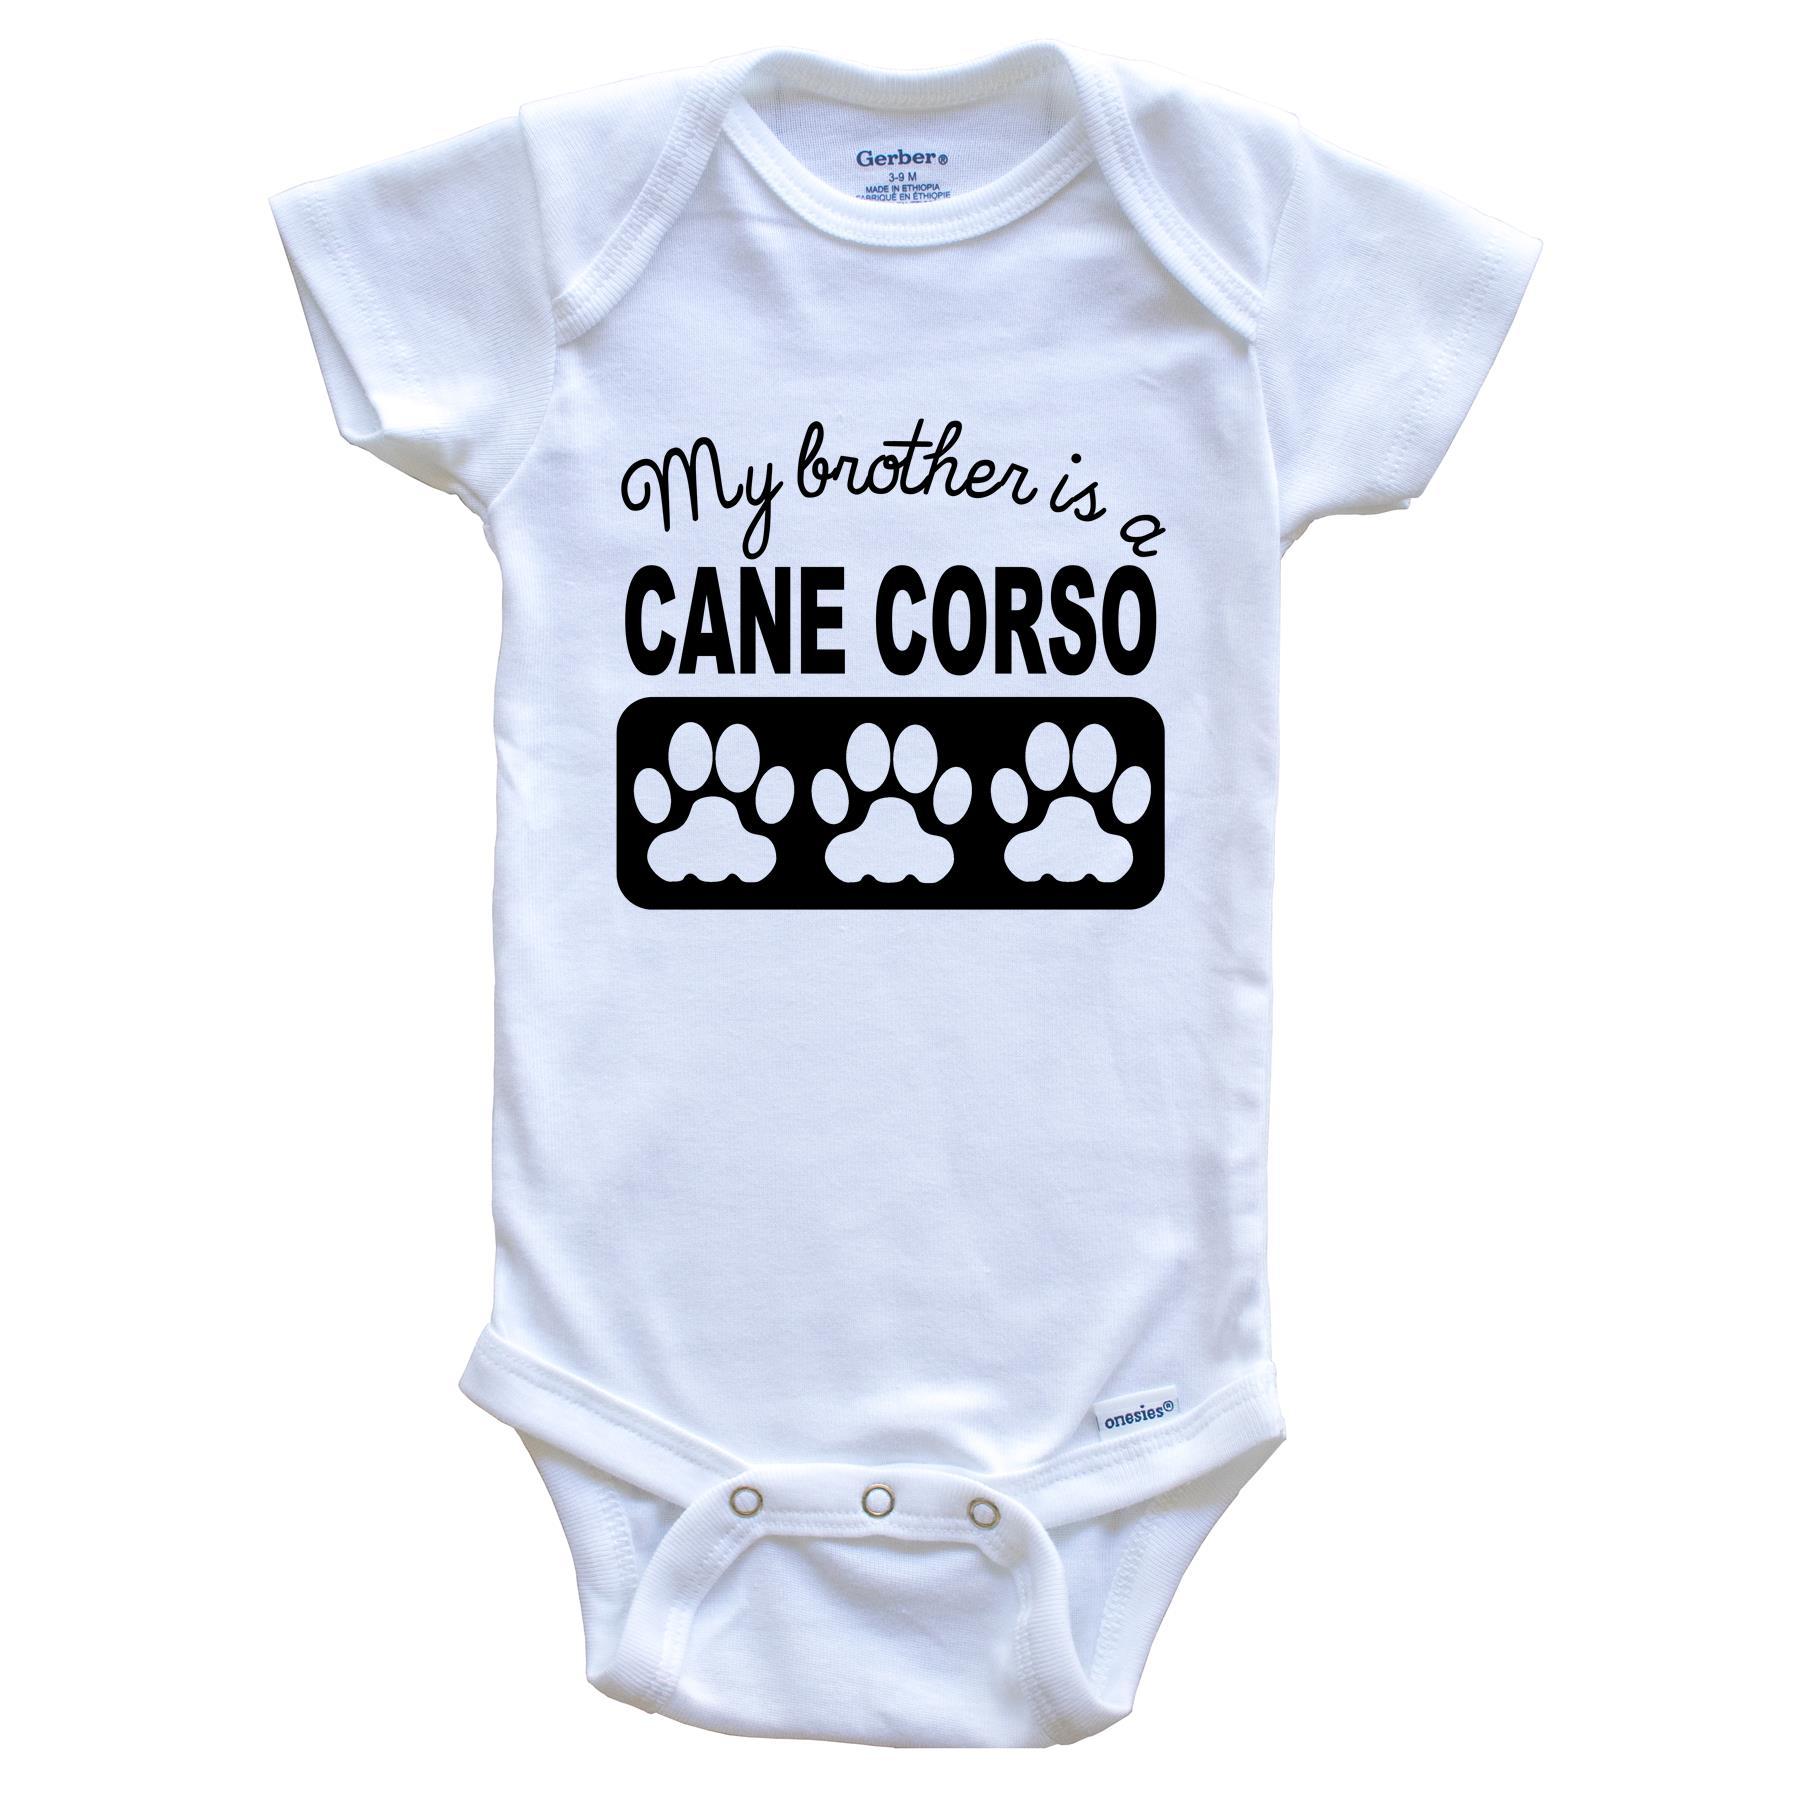 My Brother Is A Cane Corso Baby Onesie